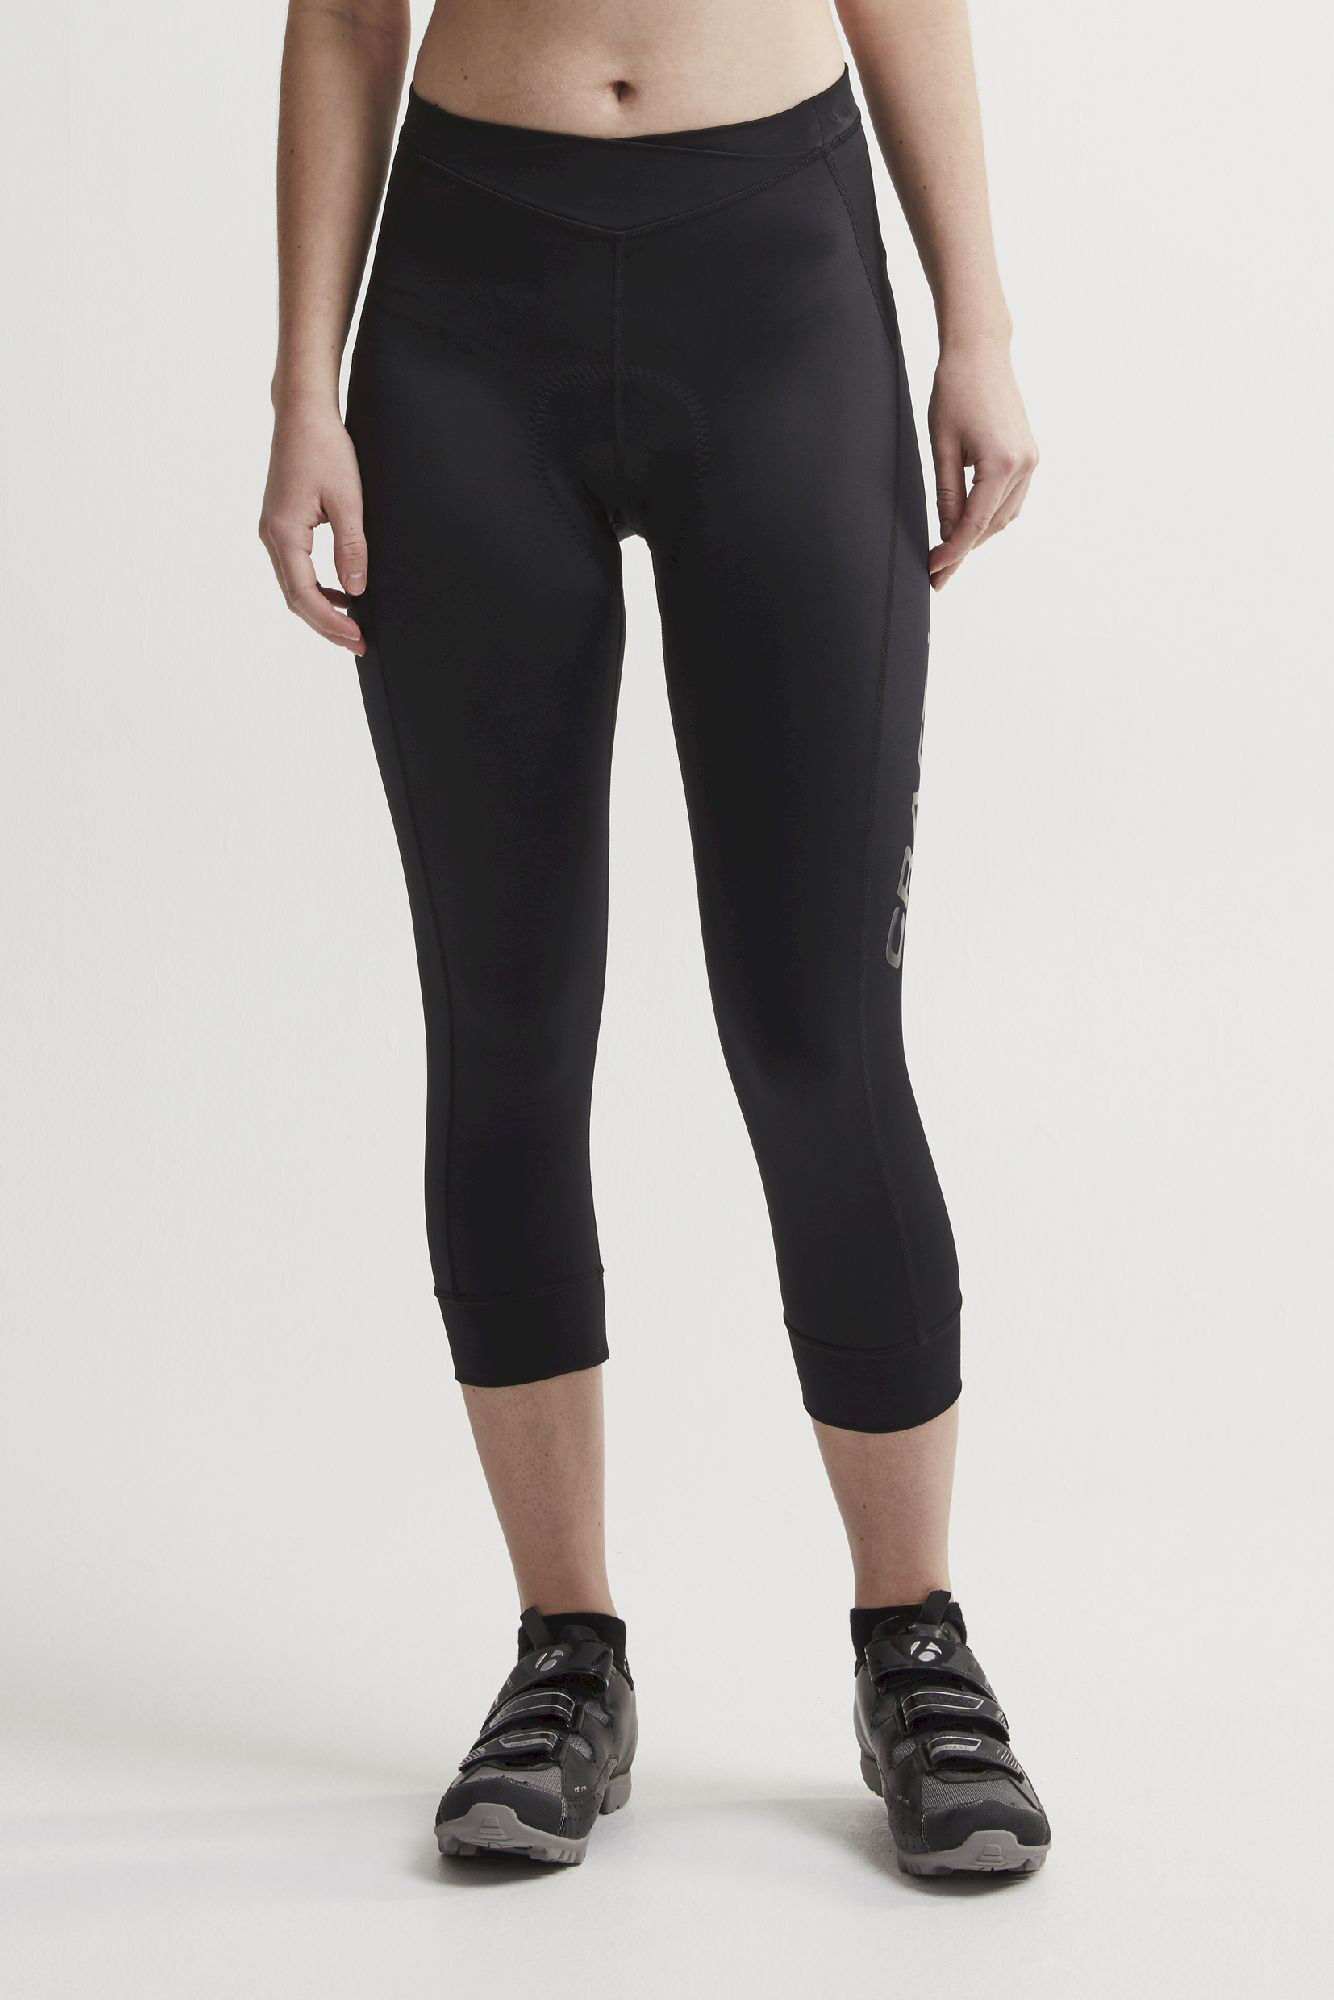 Craft Essence Knickers - Cycling trousers - Women's | Hardloop